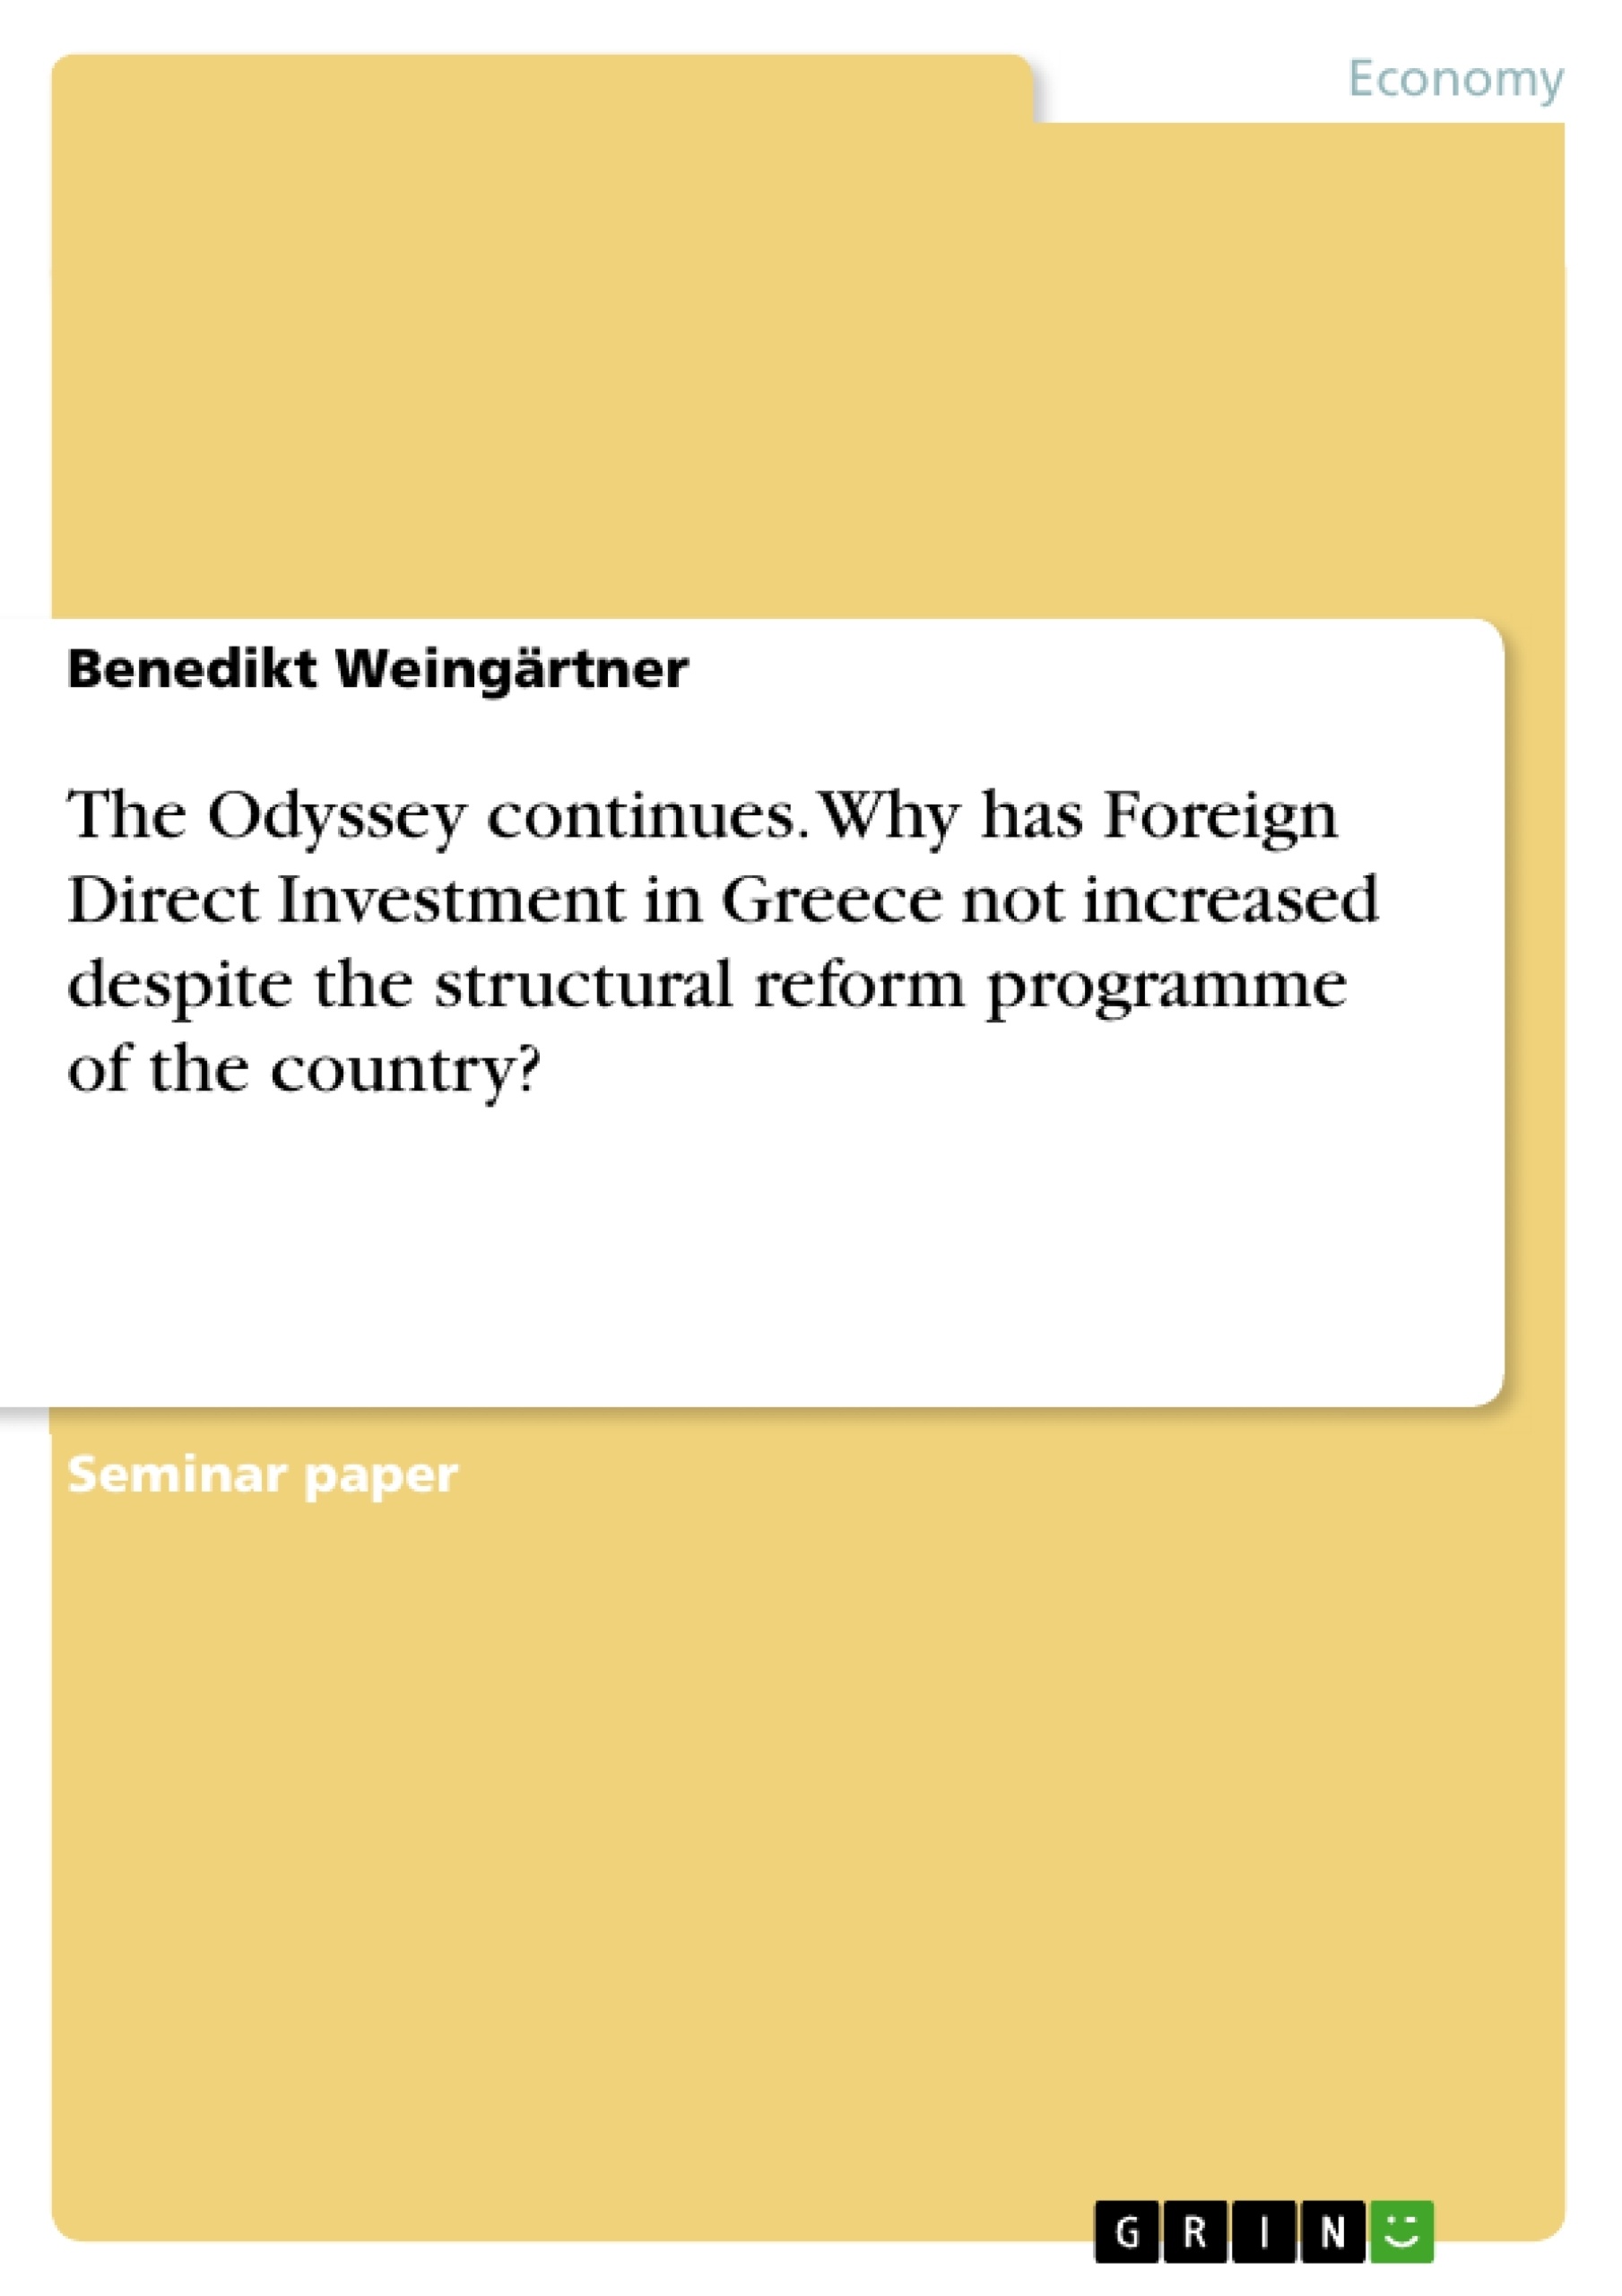 Title: The Odyssey continues. Why has Foreign Direct Investment in Greece not increased despite the structural reform programme of the country?